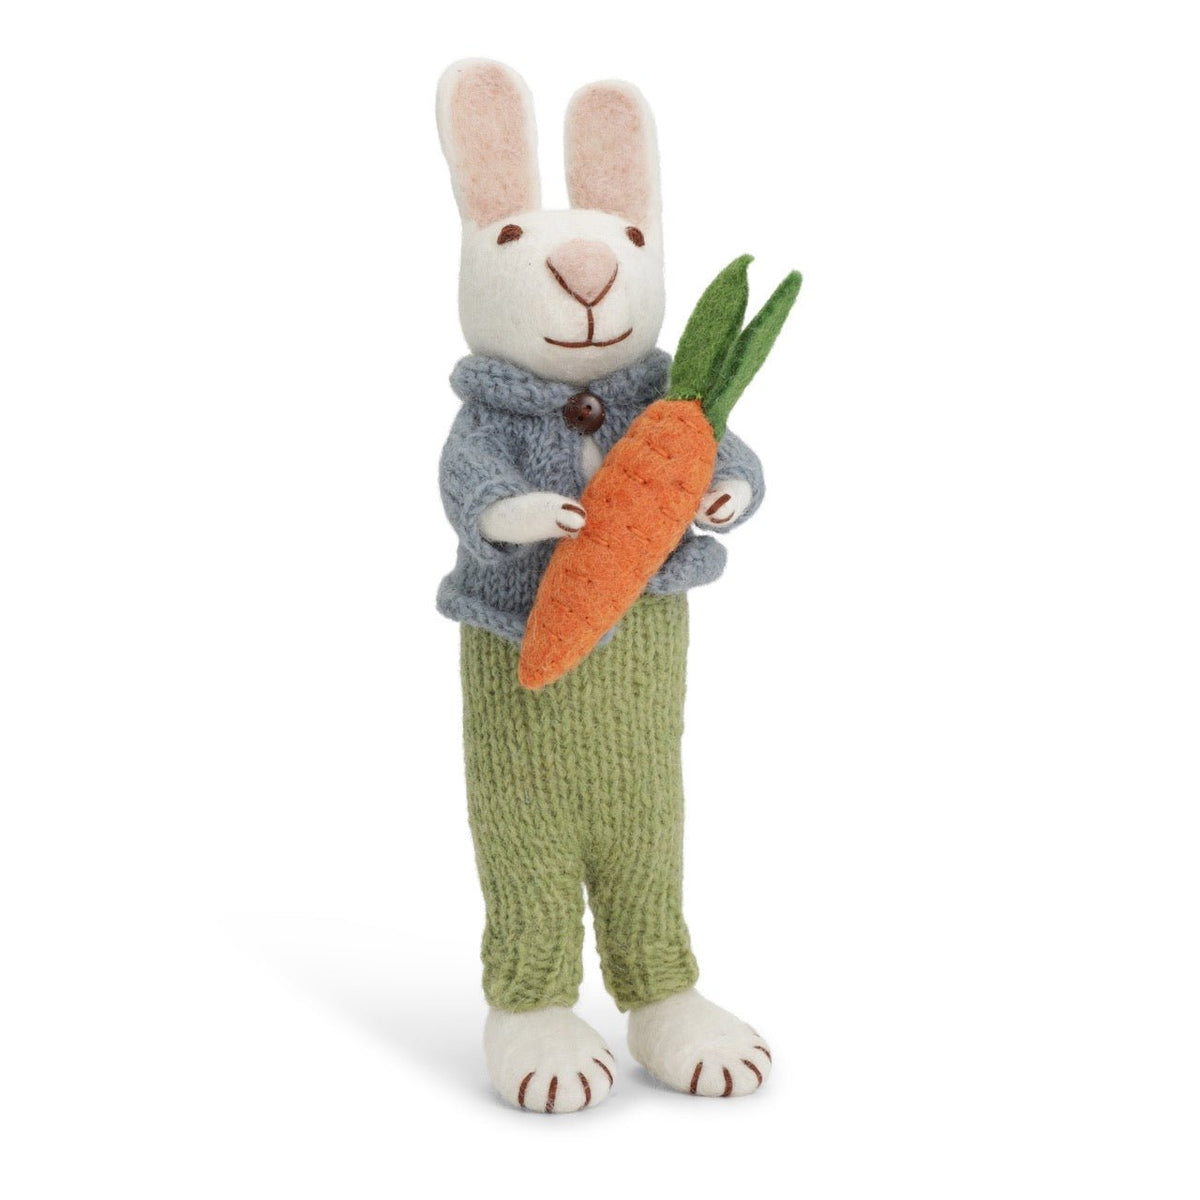 White Bunny with Blue Jacket, Green Pants and Carrot by Én Gry & Sif - Maude Kids Decor